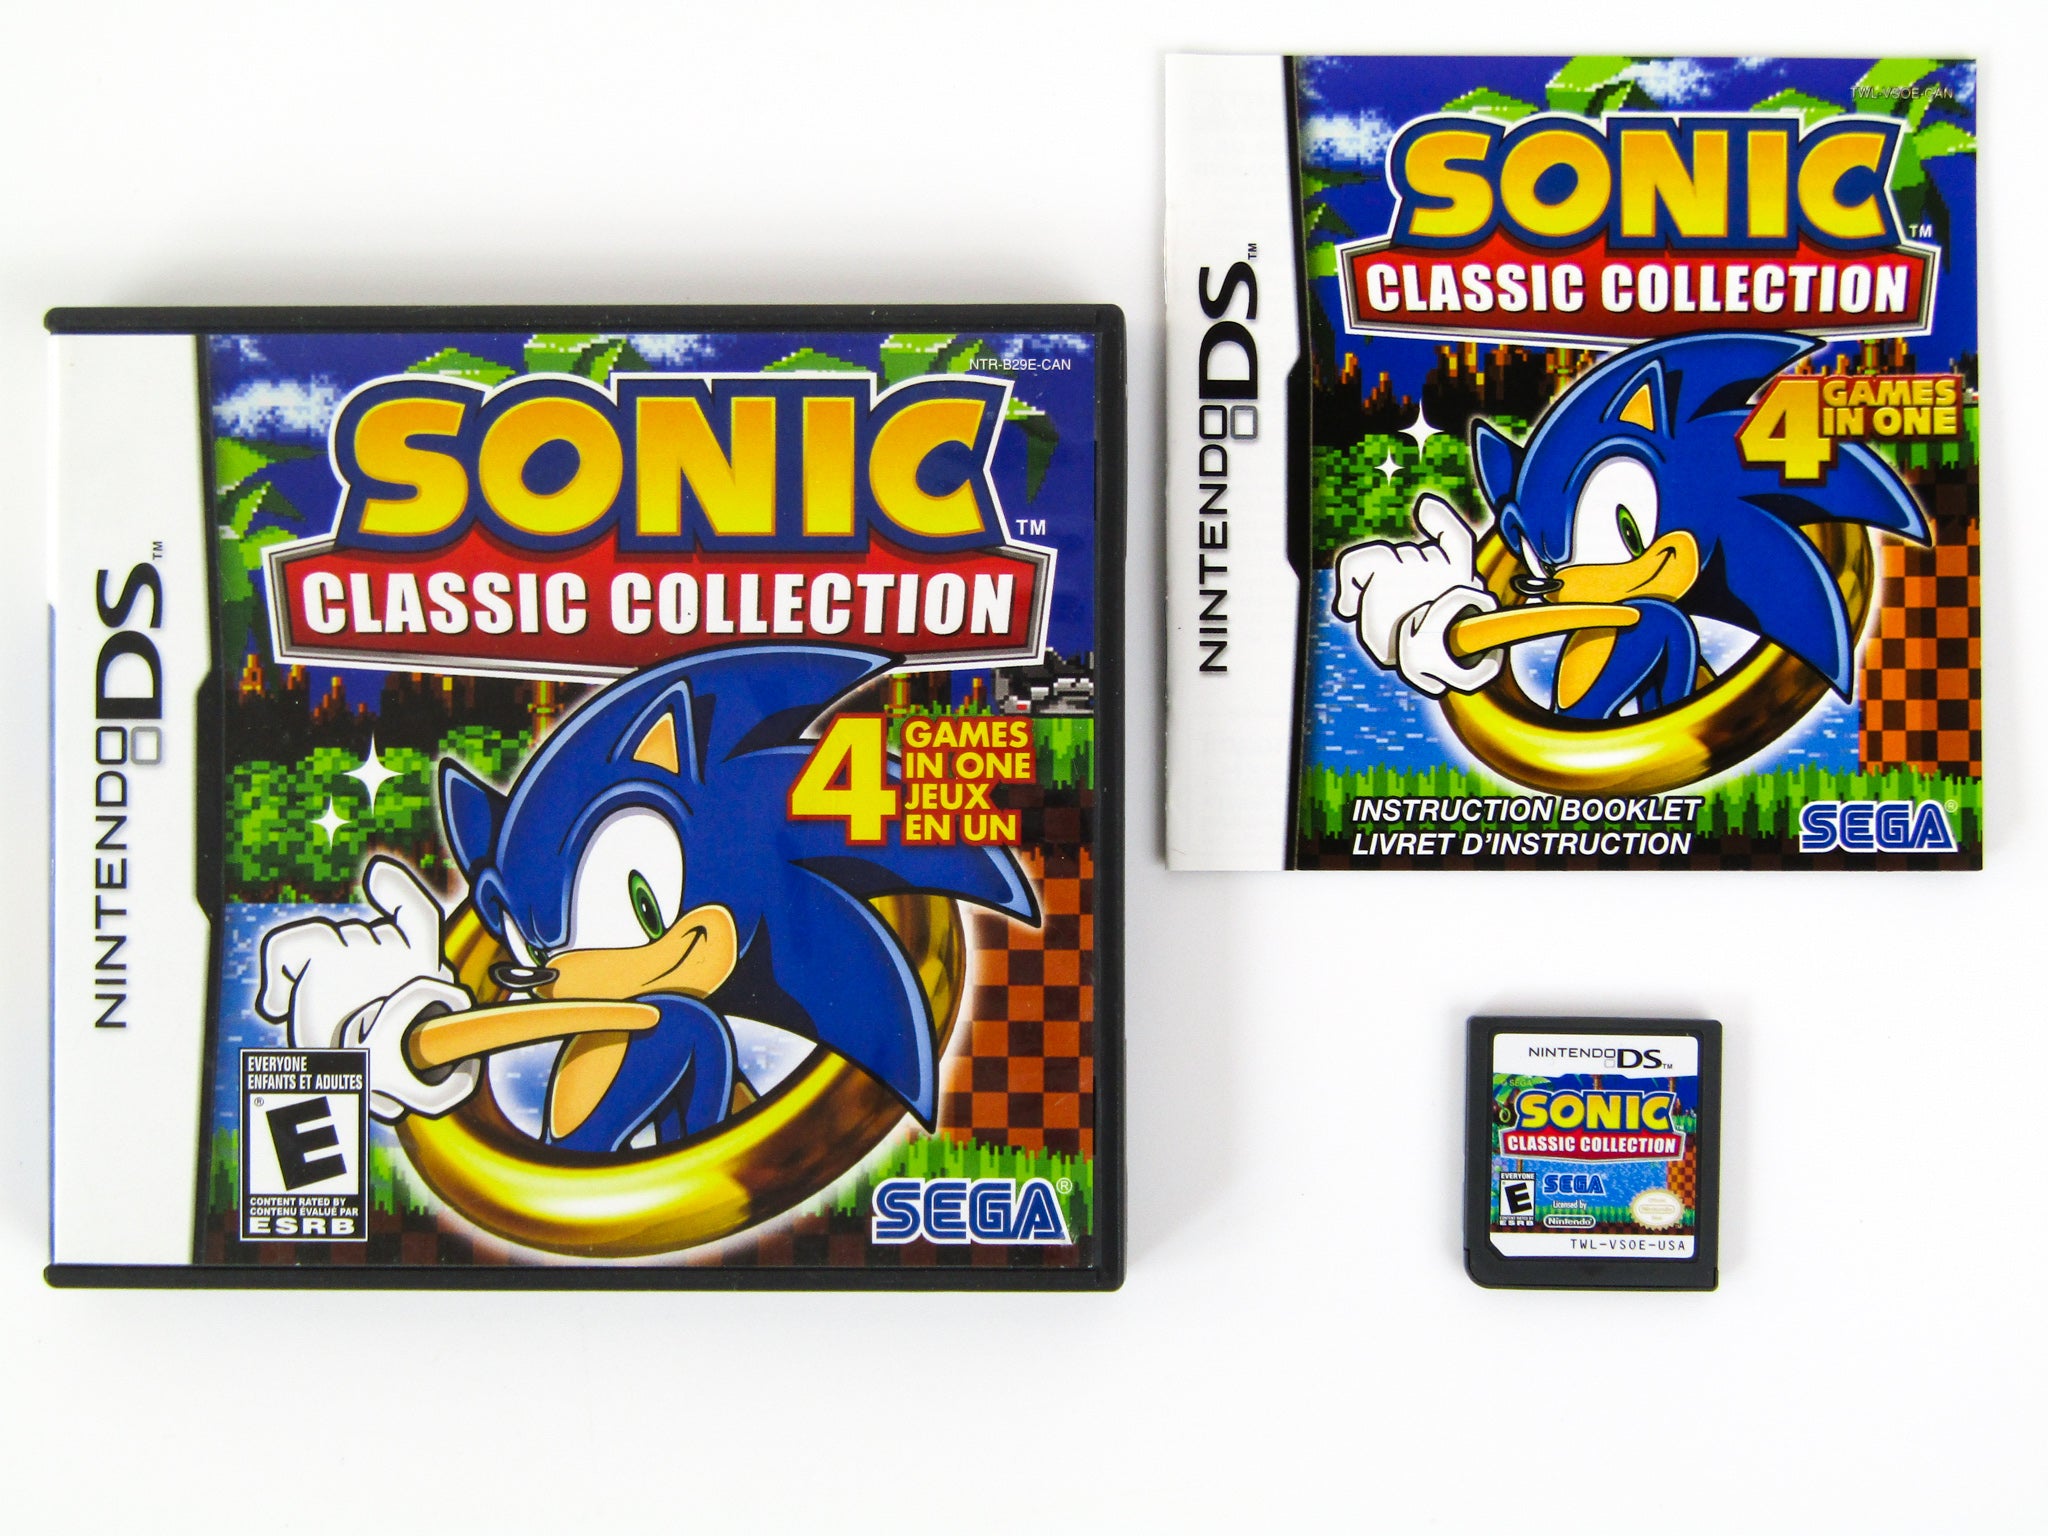 Sonic Classic Collection - Nintendo DS Gameplay 